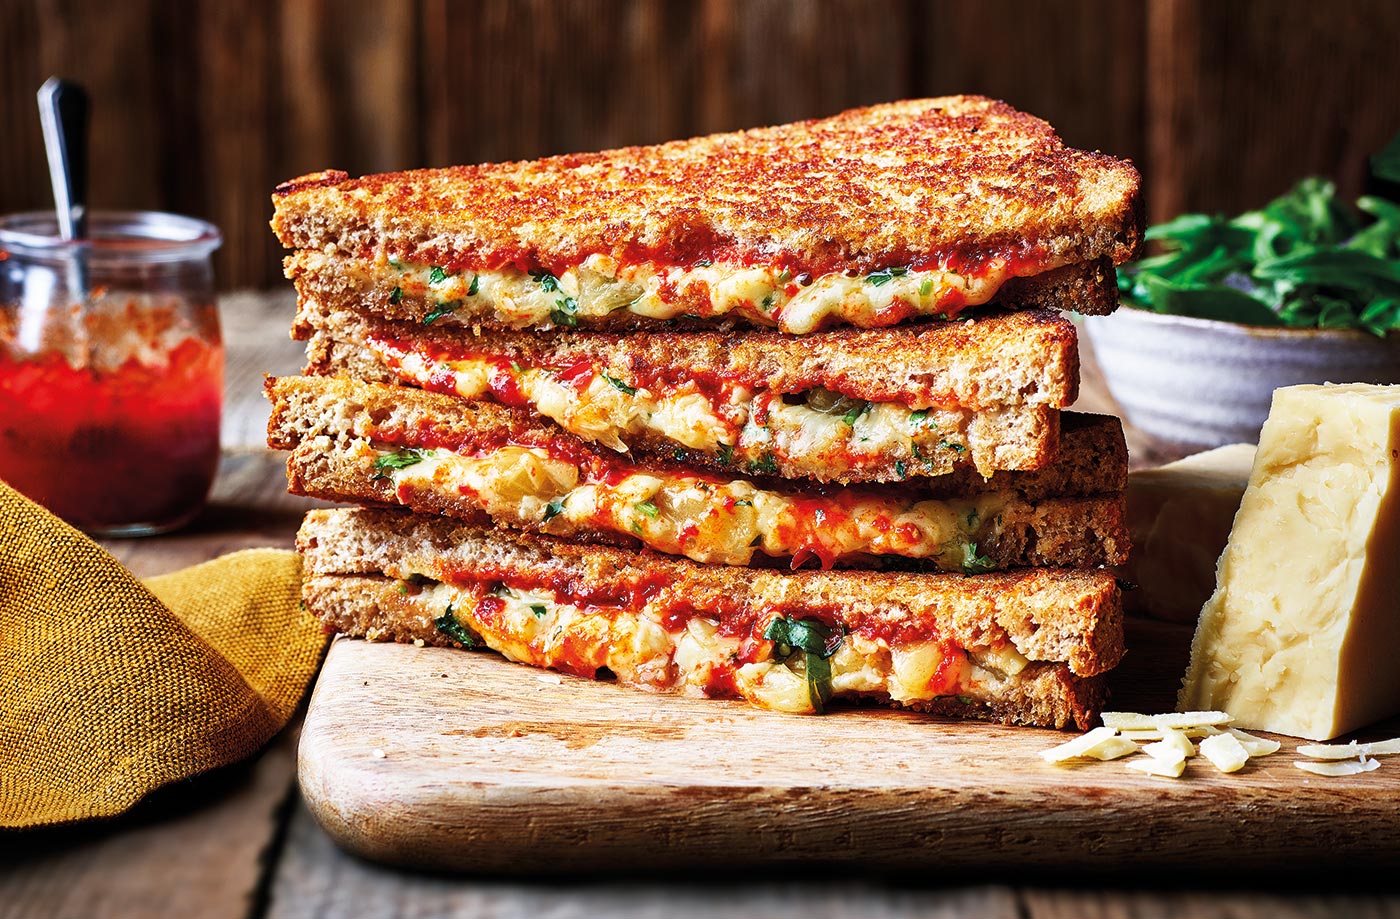 Upgrade your lunchtime with an oozy cheese toastie recipe